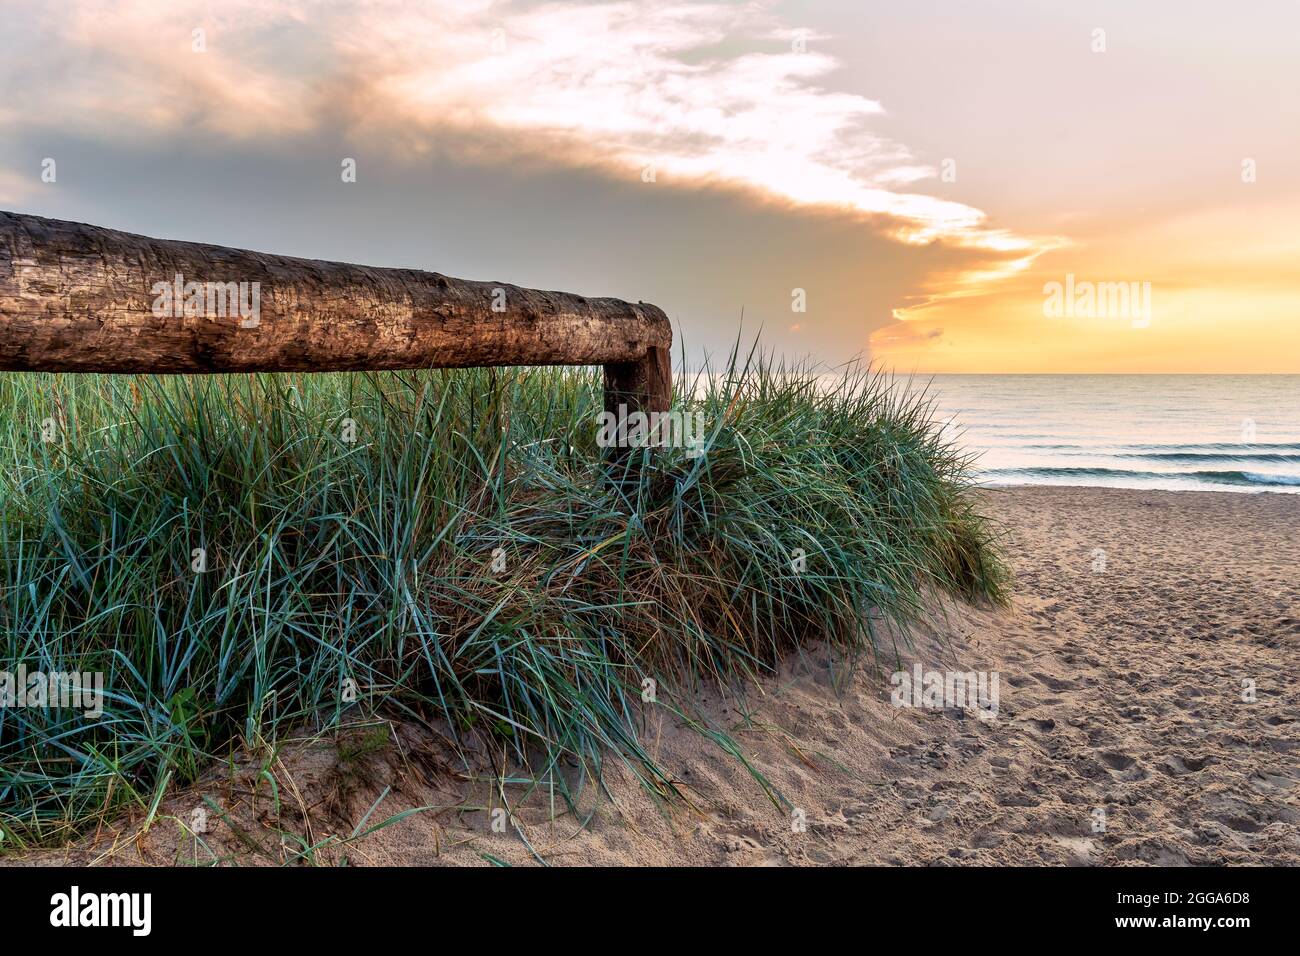 Entrance to the beach of the Baltic Sea along a wooden railing and tall grass, a sandy beach at sunset, Poland Baltic Sea, Darłowo Stock Photo